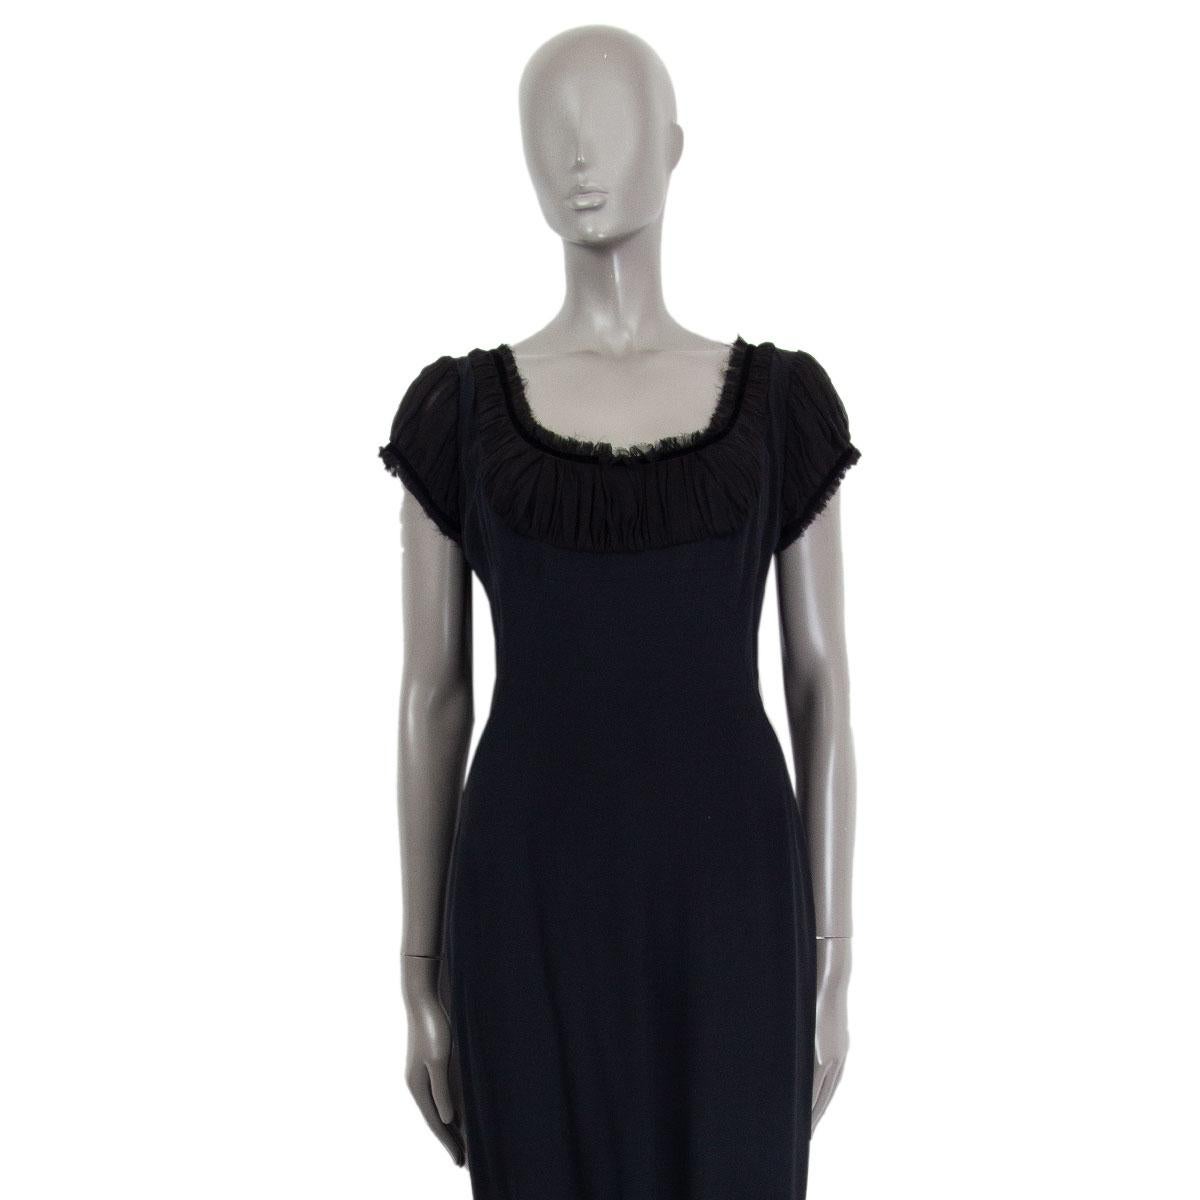 Alexander McQueen gathered short sleeve sheath dress in black acetate (45%), viscose (45%) and silk (10%) with a wide neck. Closes on the back with a concealed zipper. Lined in acetate (74%) and silk (26%). Has been worn and is in excellent